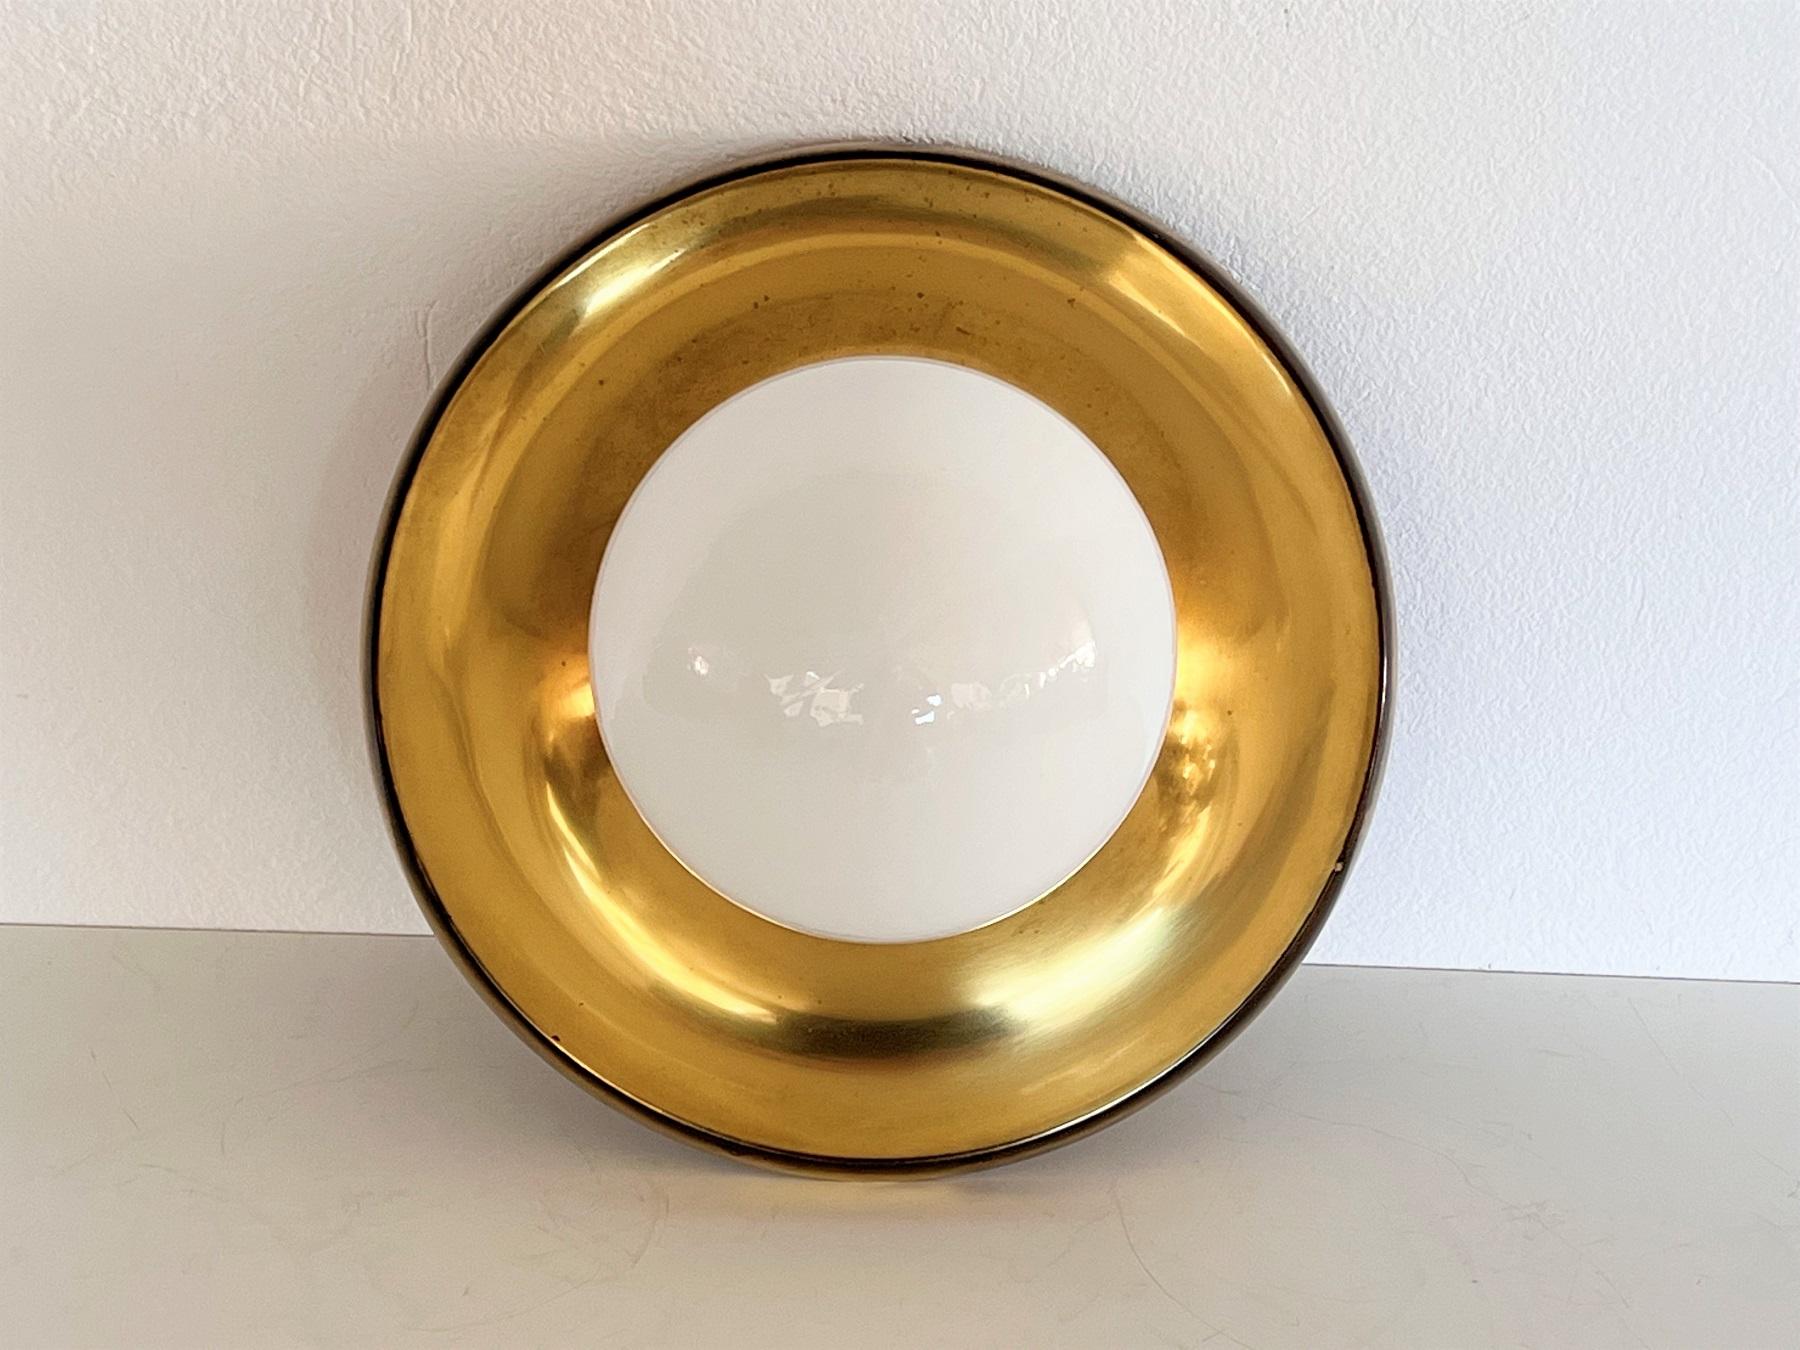 Italian Achille Castiglioni 'Light Ball' Wall or Ceiling Lamp for Flos, 1960s For Sale 2